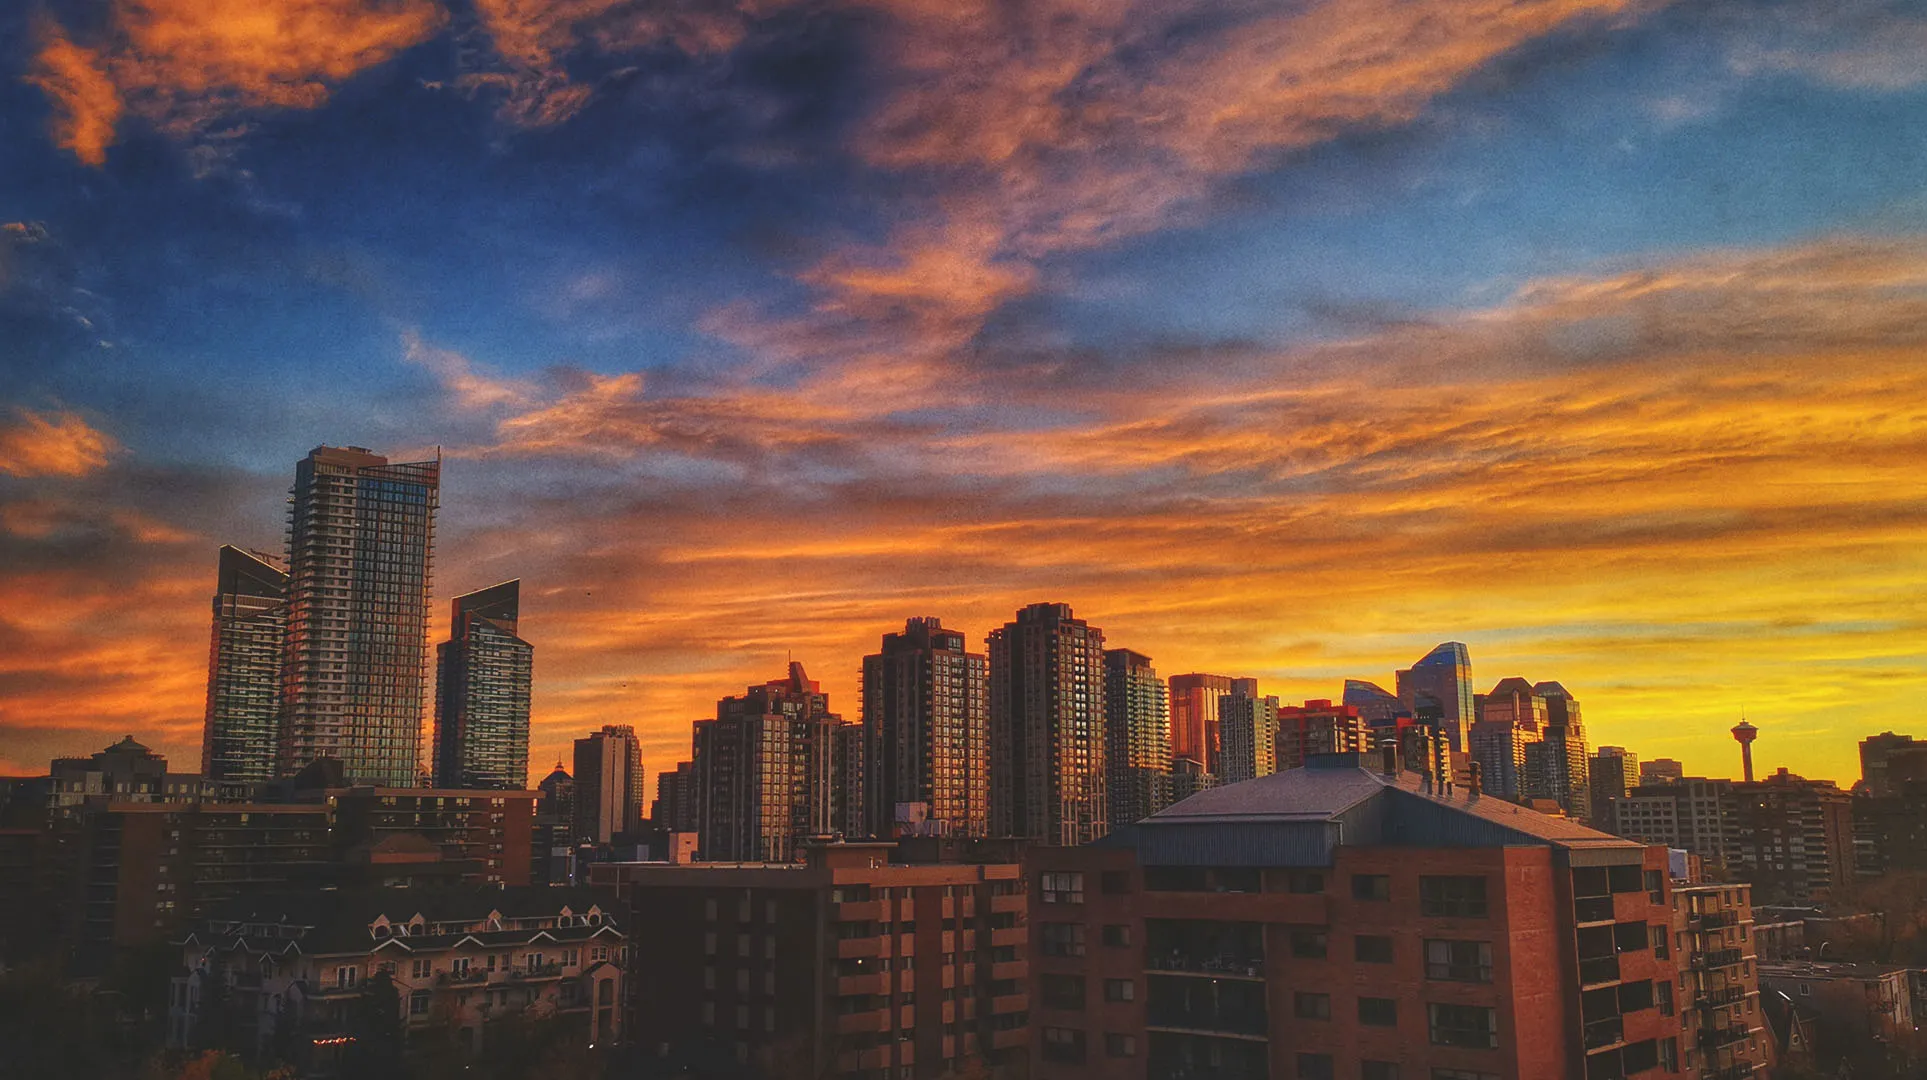 downtown Calgary skyline with a vibrant orange, yellow, blue and purple sunset